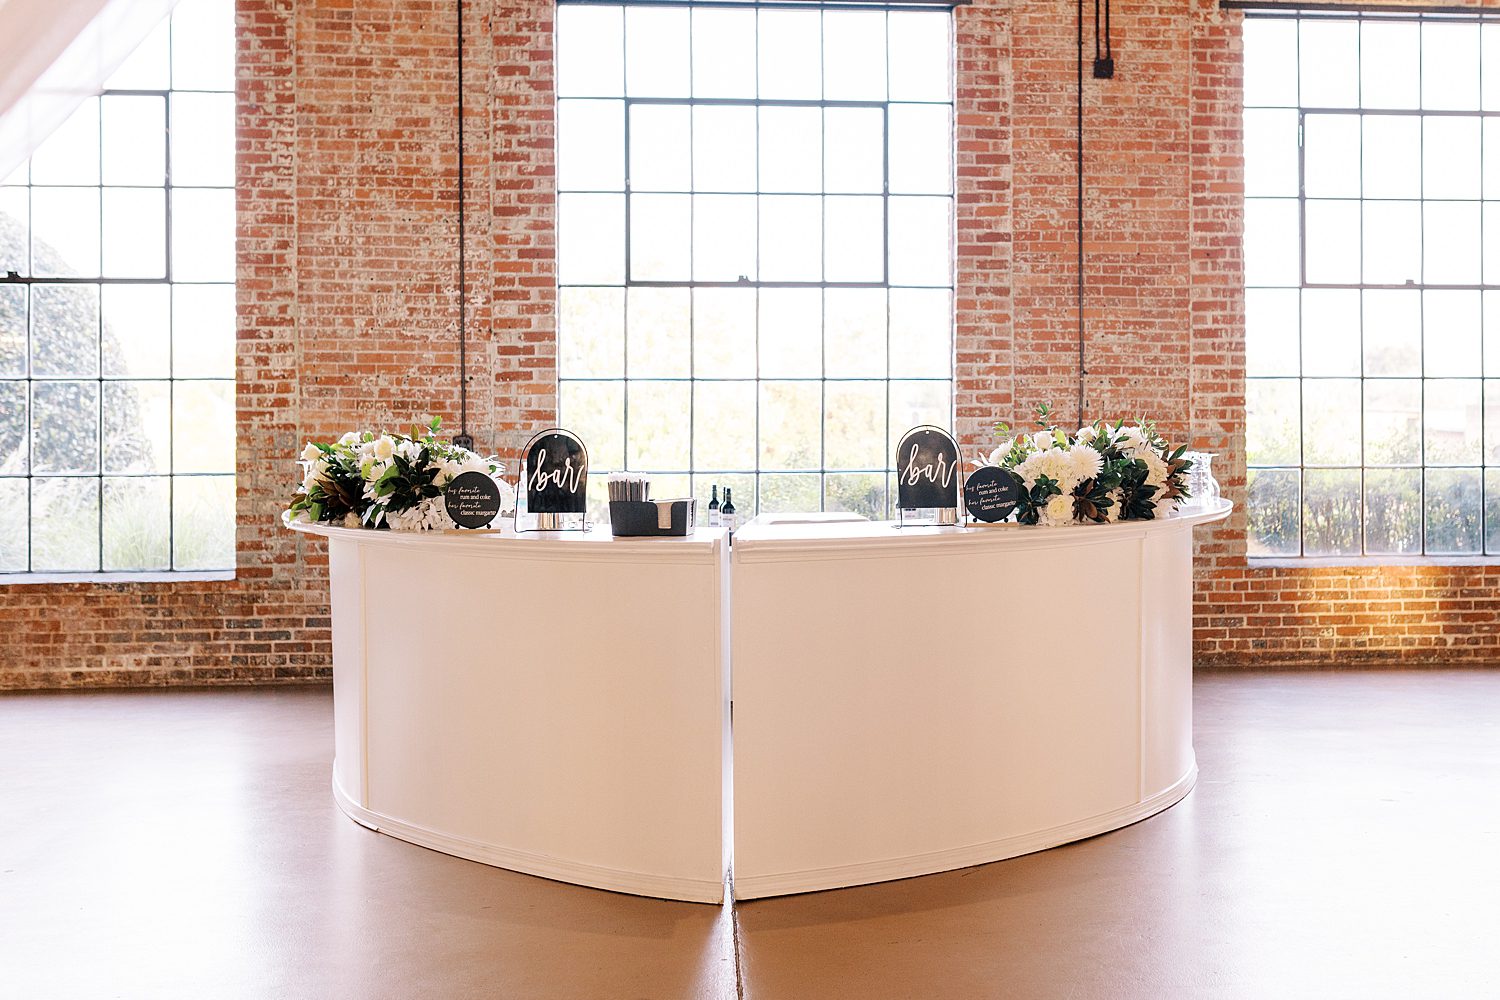 custom bar with black signs for The Bibb Mill Event Center wedding reception